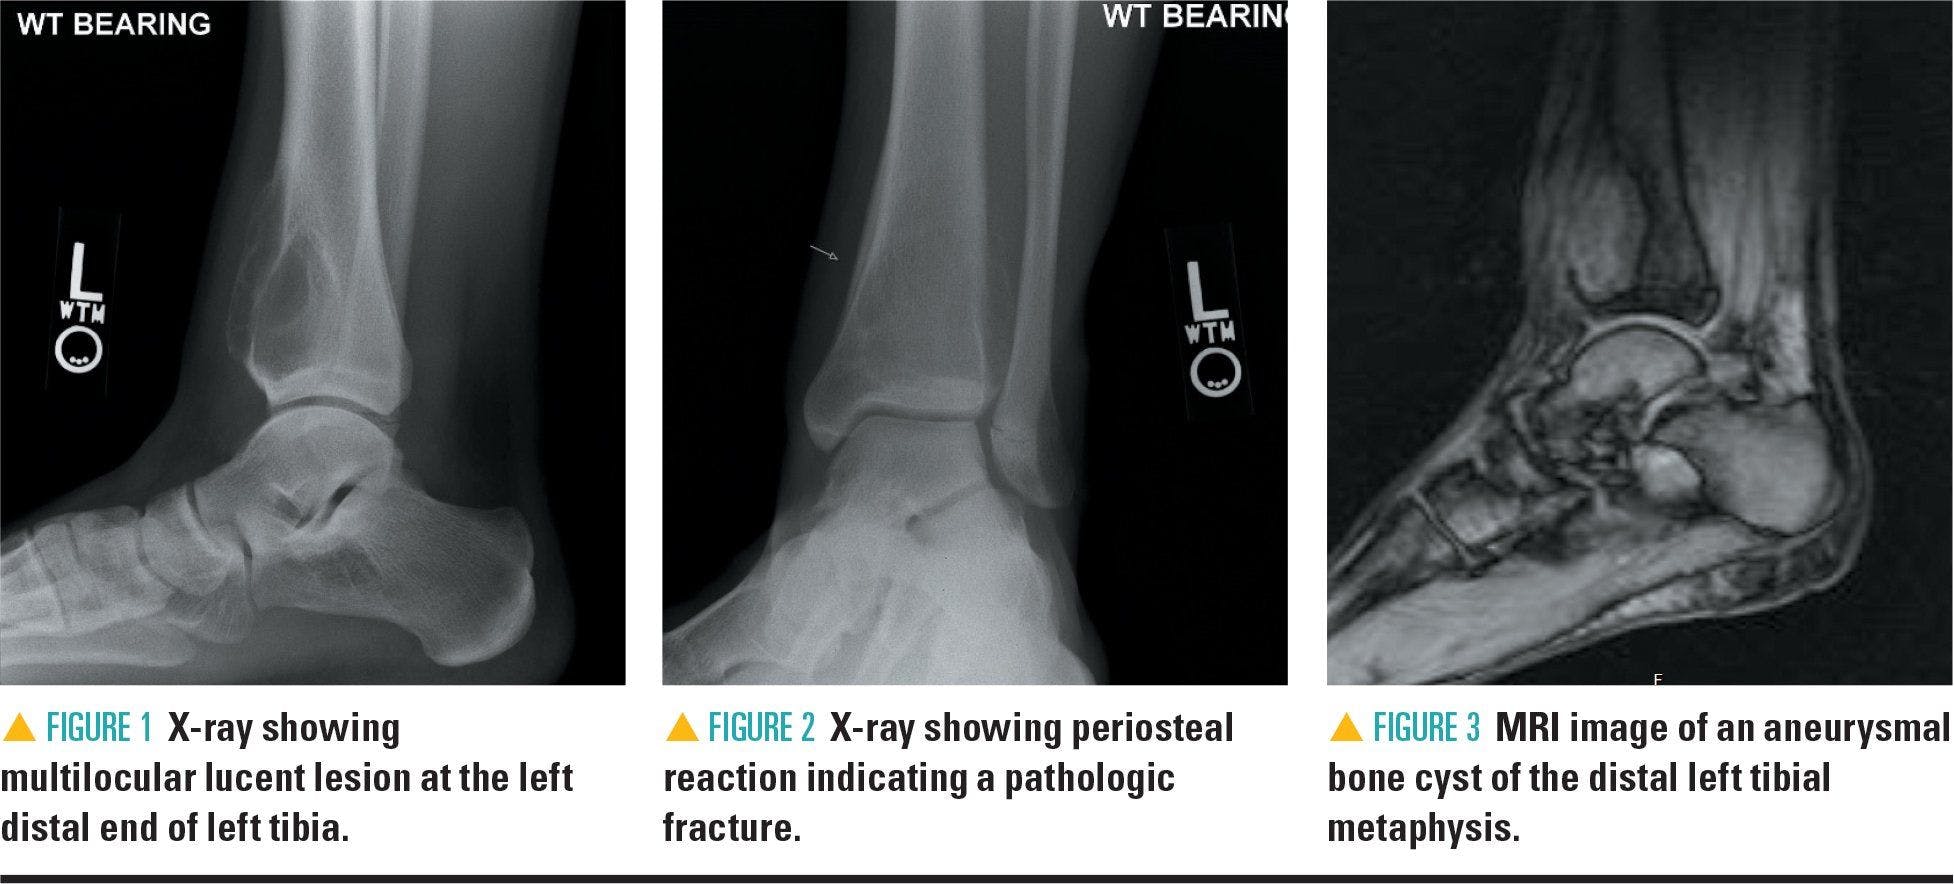 X-rays and MRI showing the patient's ankle